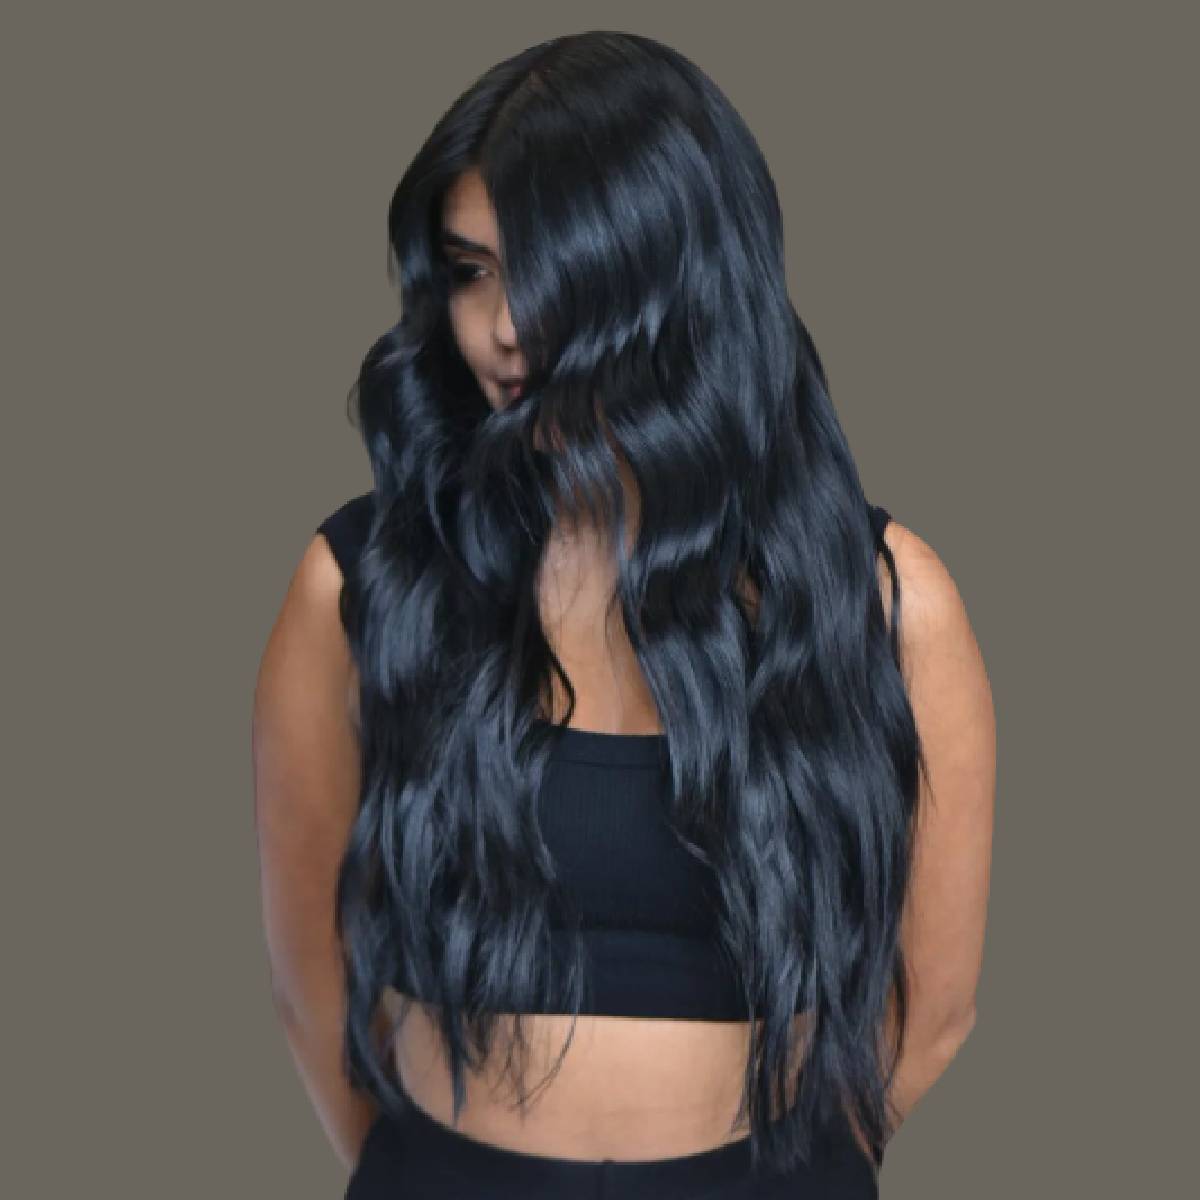 29 Gorgeous Long Black Hair Ideas to Consider Right Now